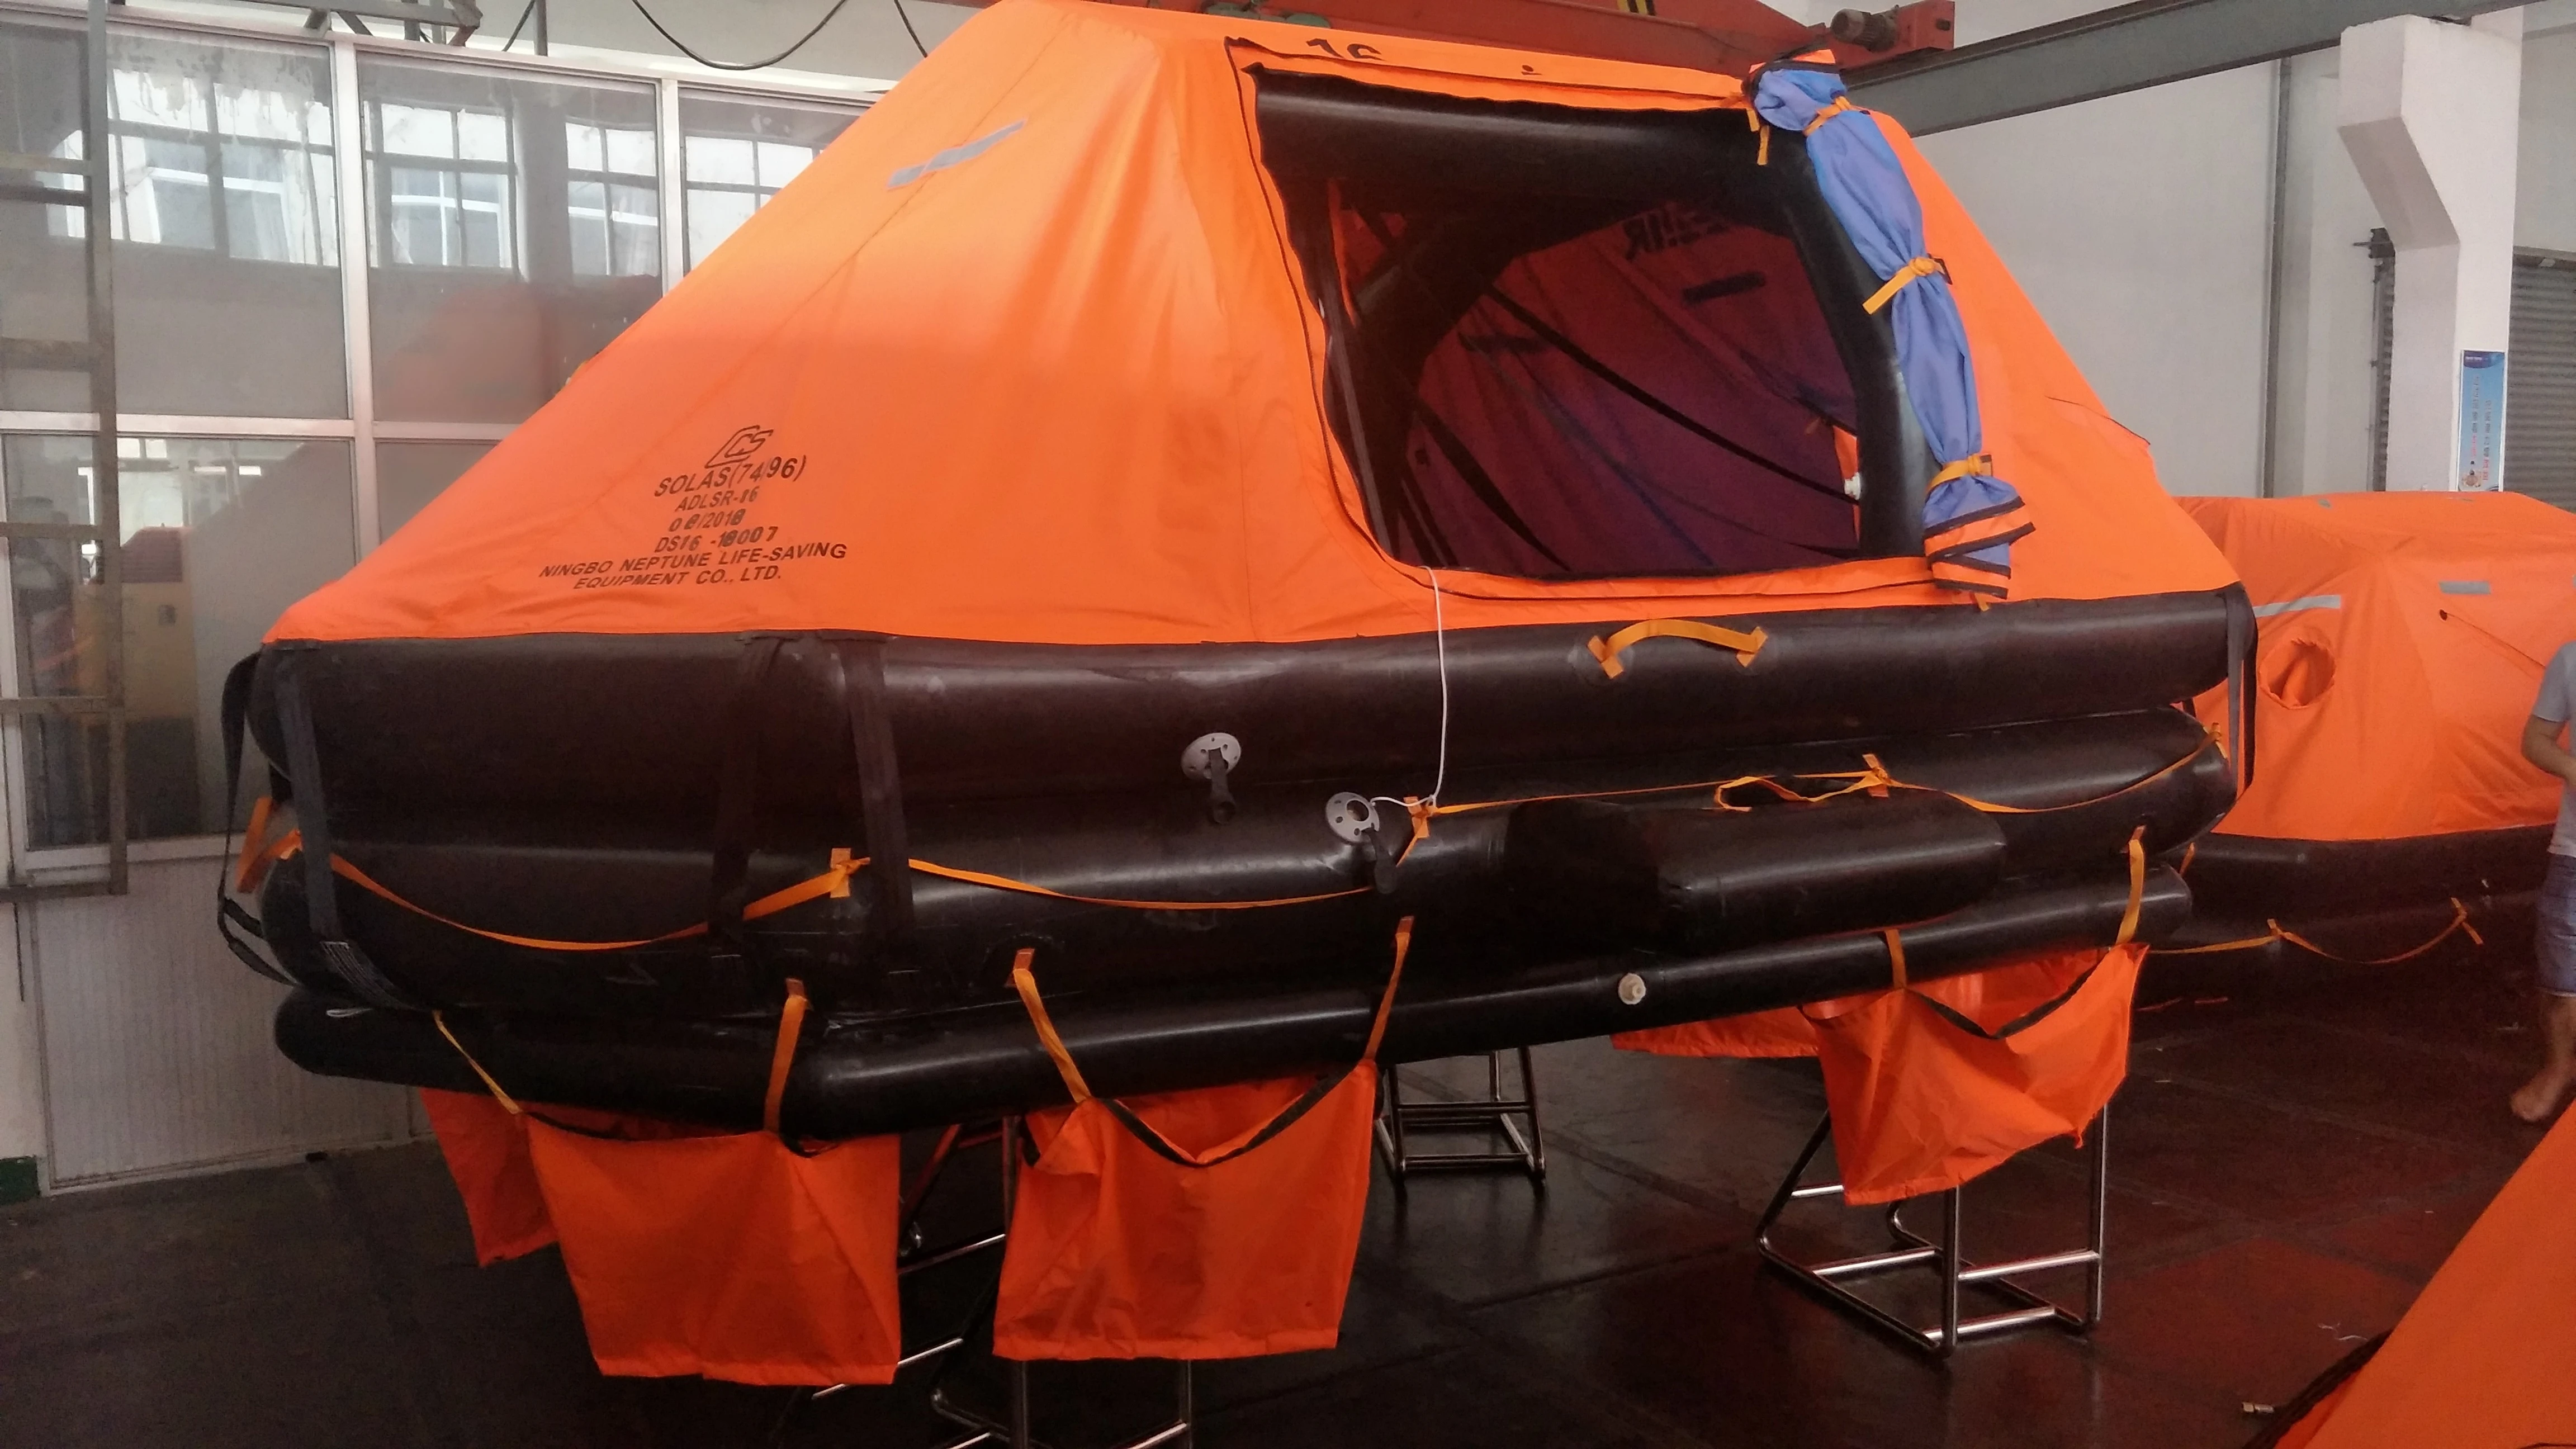 DAVIT LAUNCHED AND SELF RIGHTING LIFERAFT